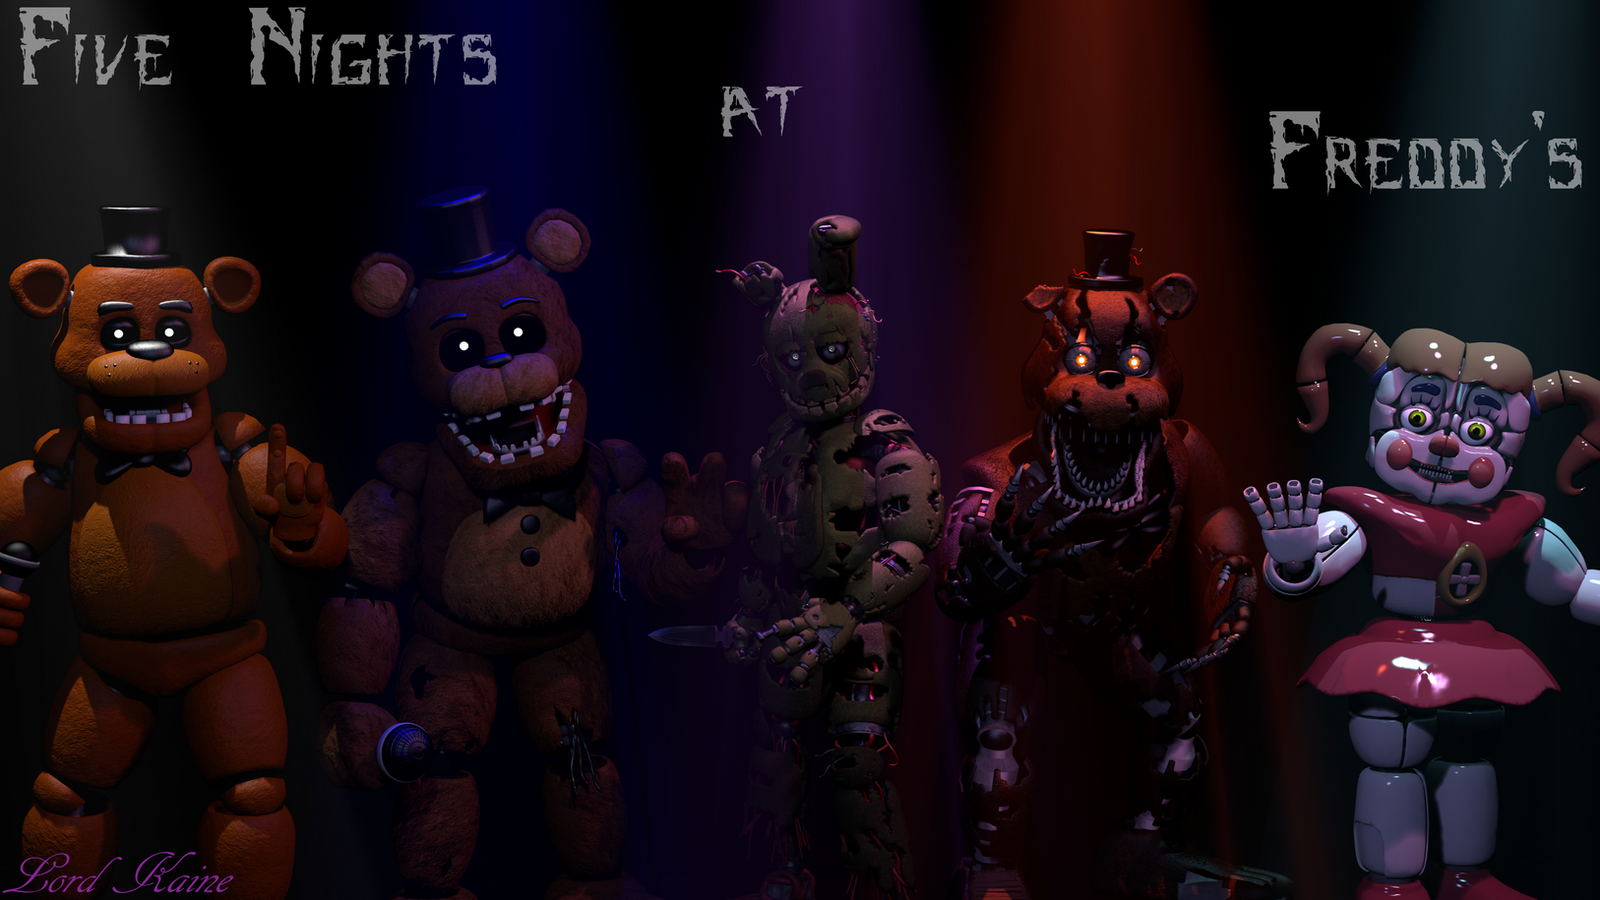 How To Stream The Five Nights At Freddy's Movie